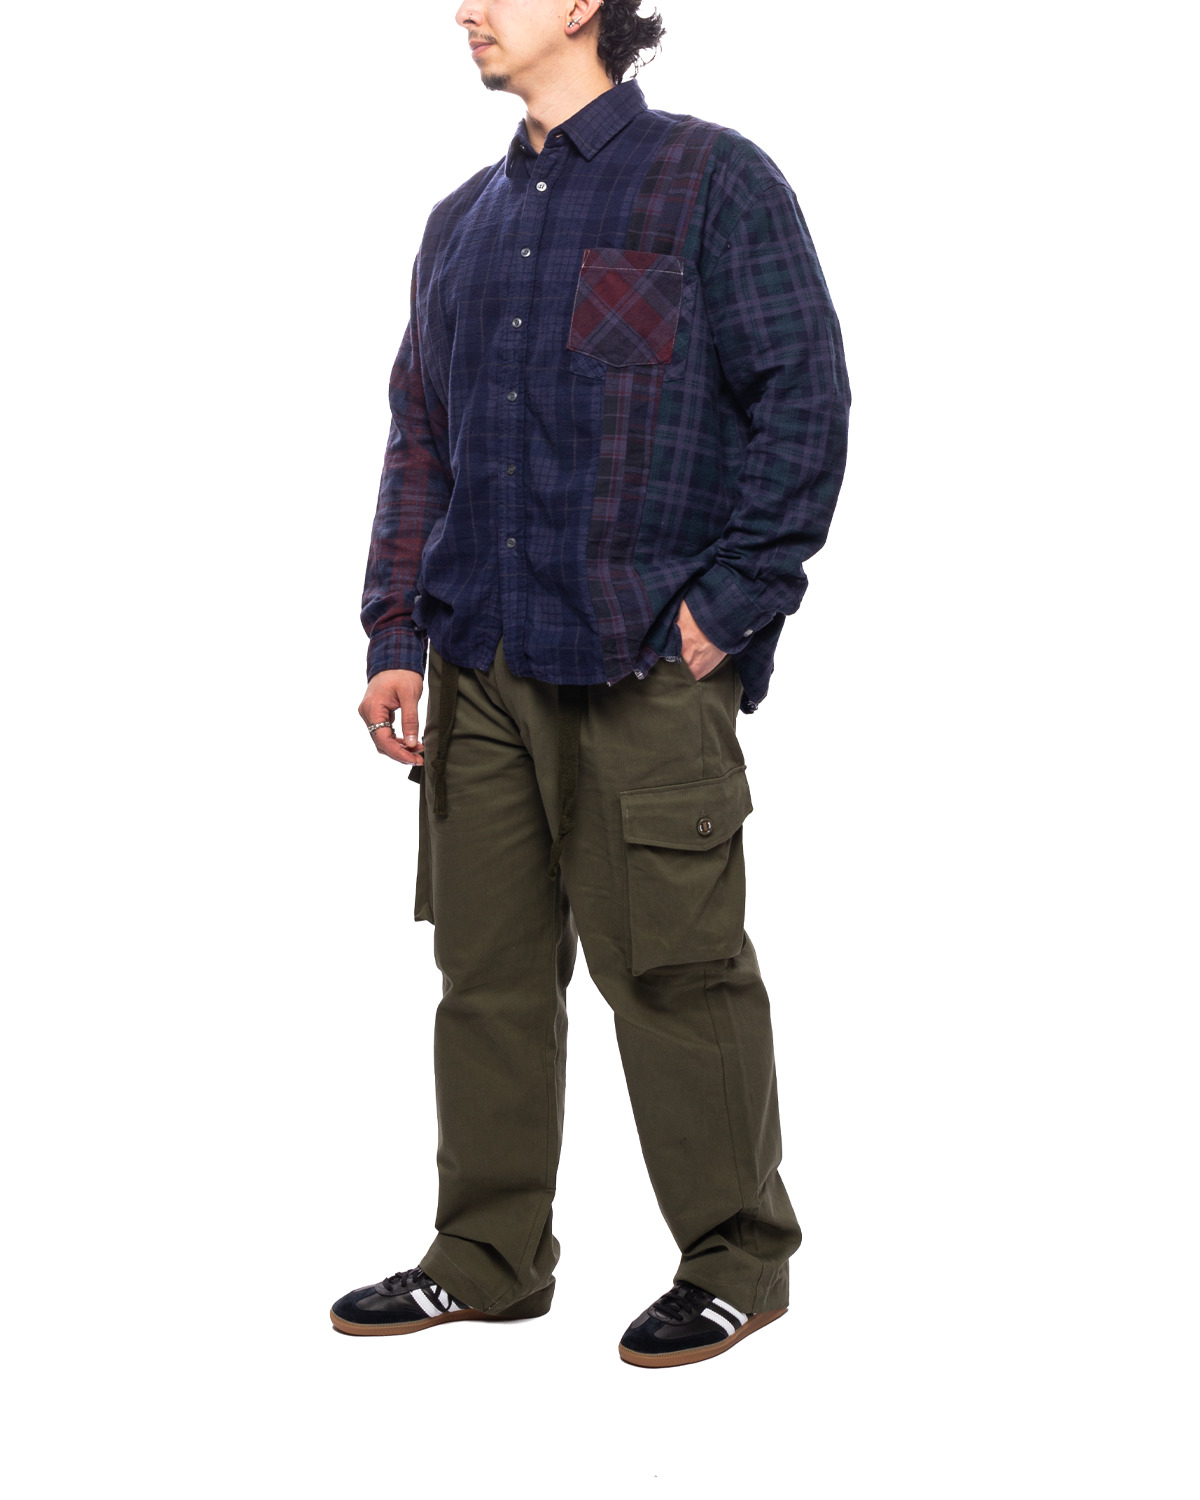 MILT2001/Trousers/Cotton. Twill Olive Drab - 2